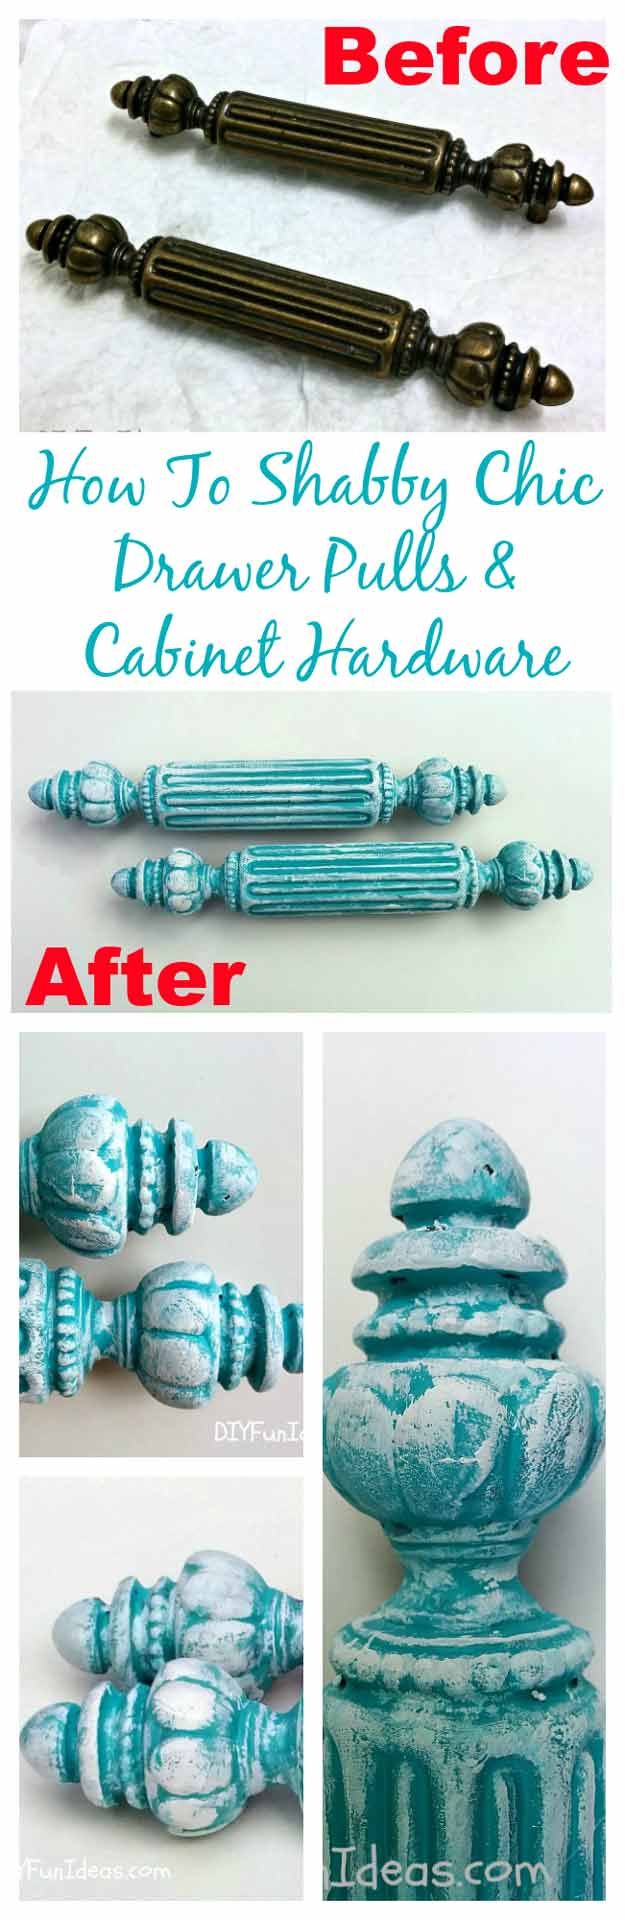 11. Shabby Chic Drawer Pulls and Cabinet Hardware -   Shabby Chic DIY Bedroom Furniture Ideas